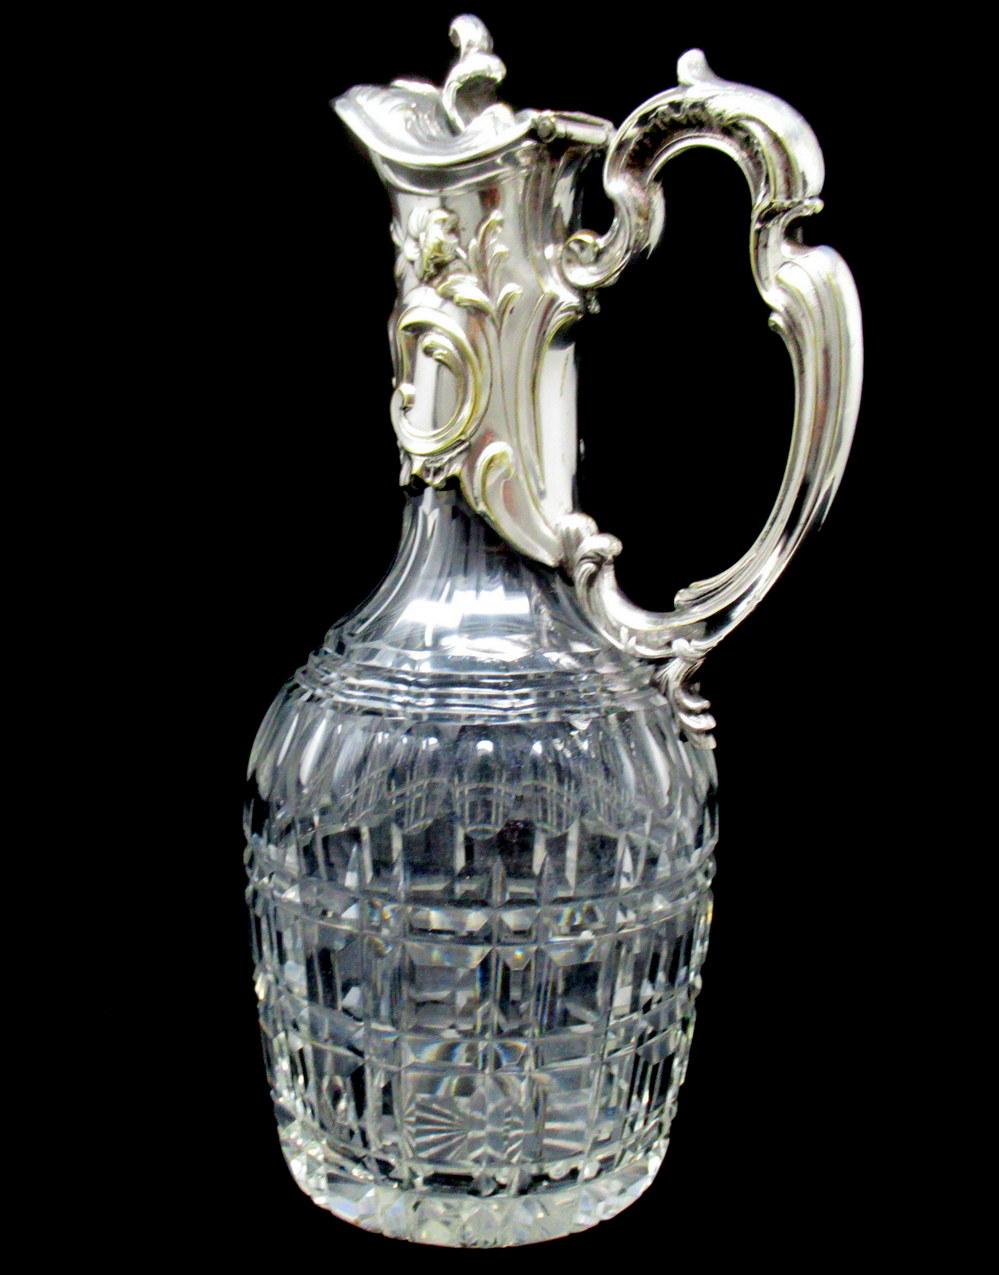 Stunning traditional form early Victorian English silverplated and hand cut full led crystal wine ewer claret jug of outstanding quality and generous proportions. Third quarter of the nineteenth century.

The main outer lower body with unusual